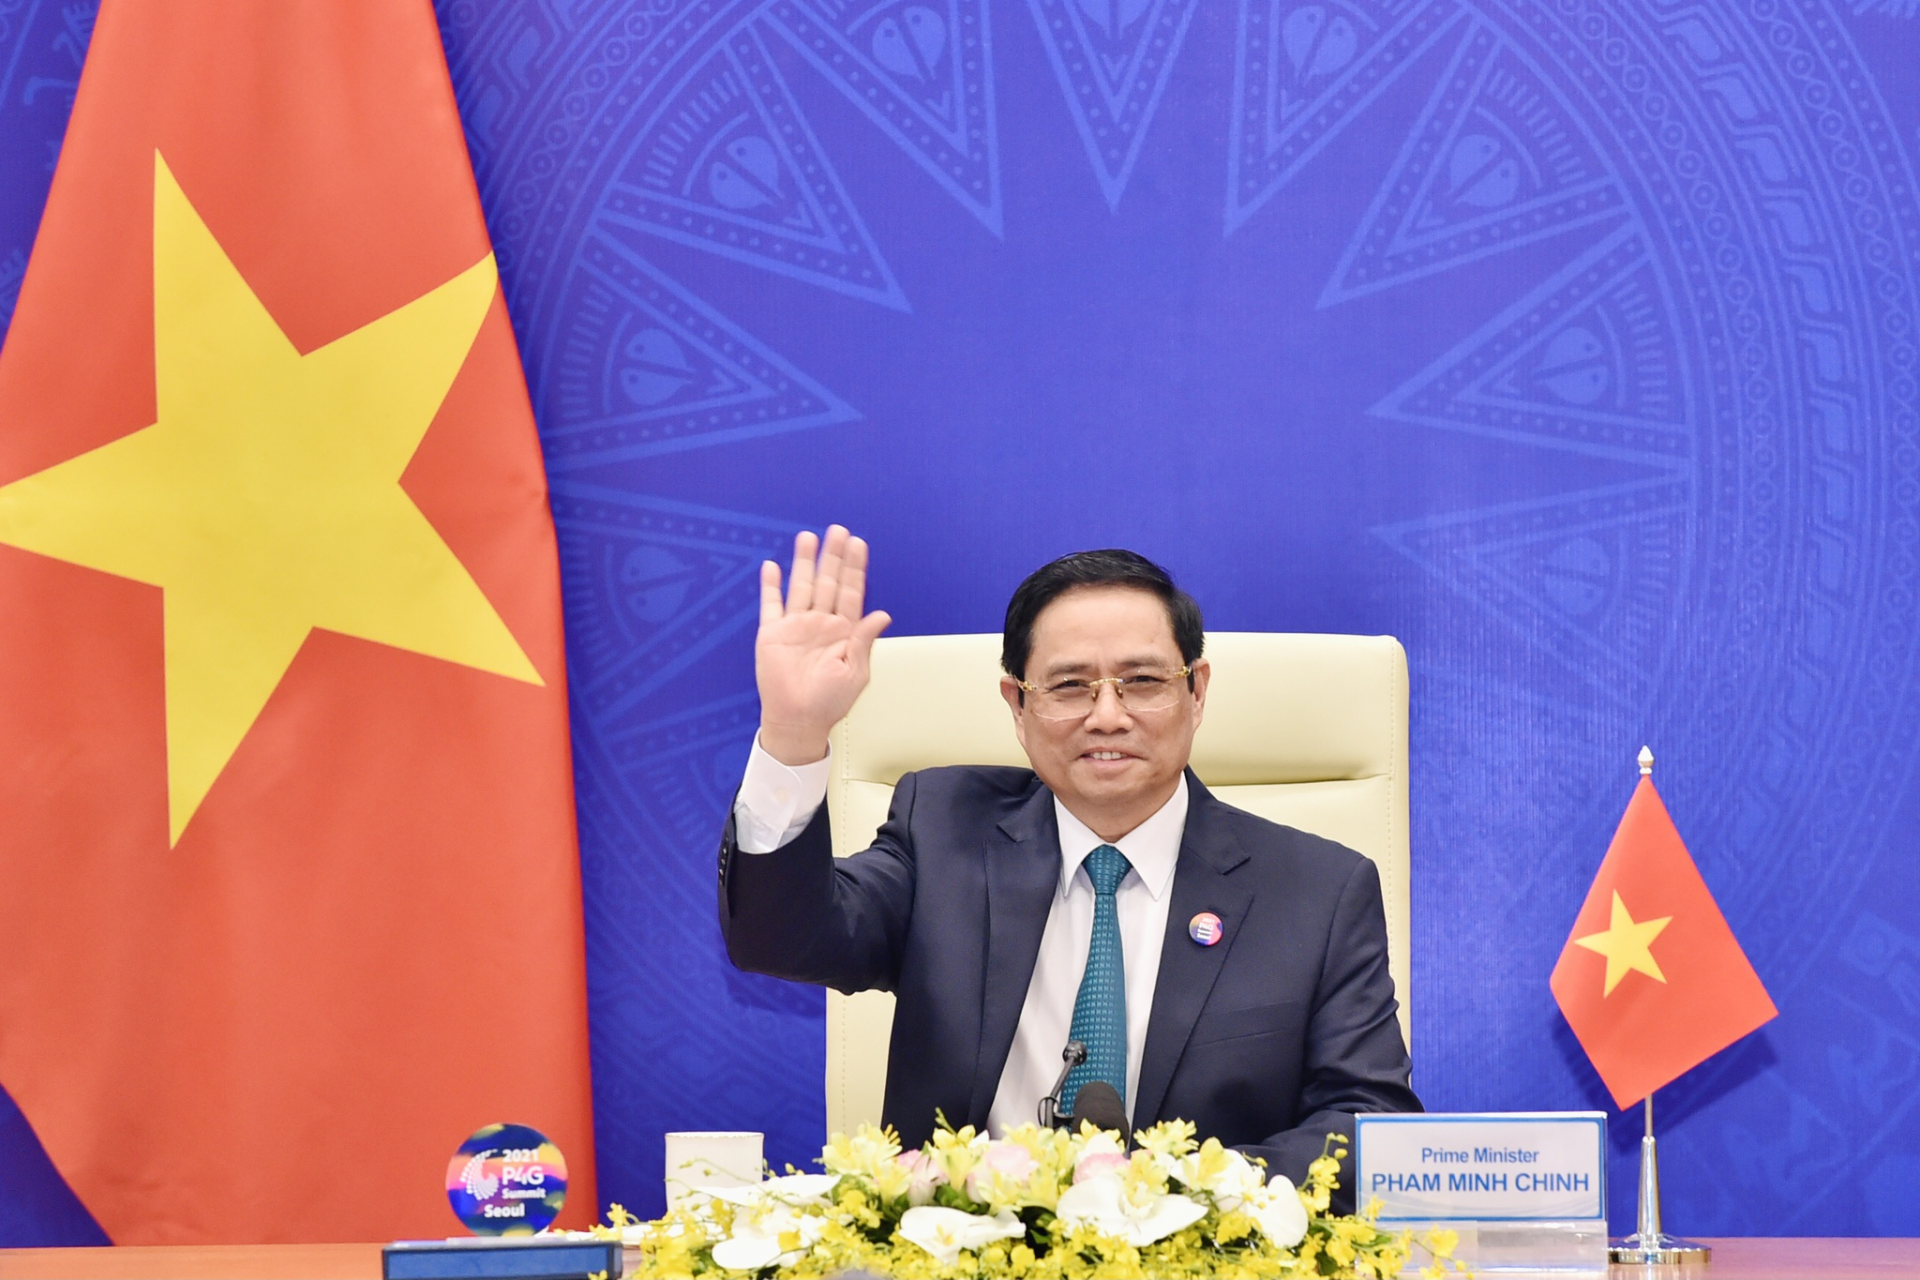 Vietnam News Today (June 1): PM attends Green Growth and Global Goals 2030 Summit